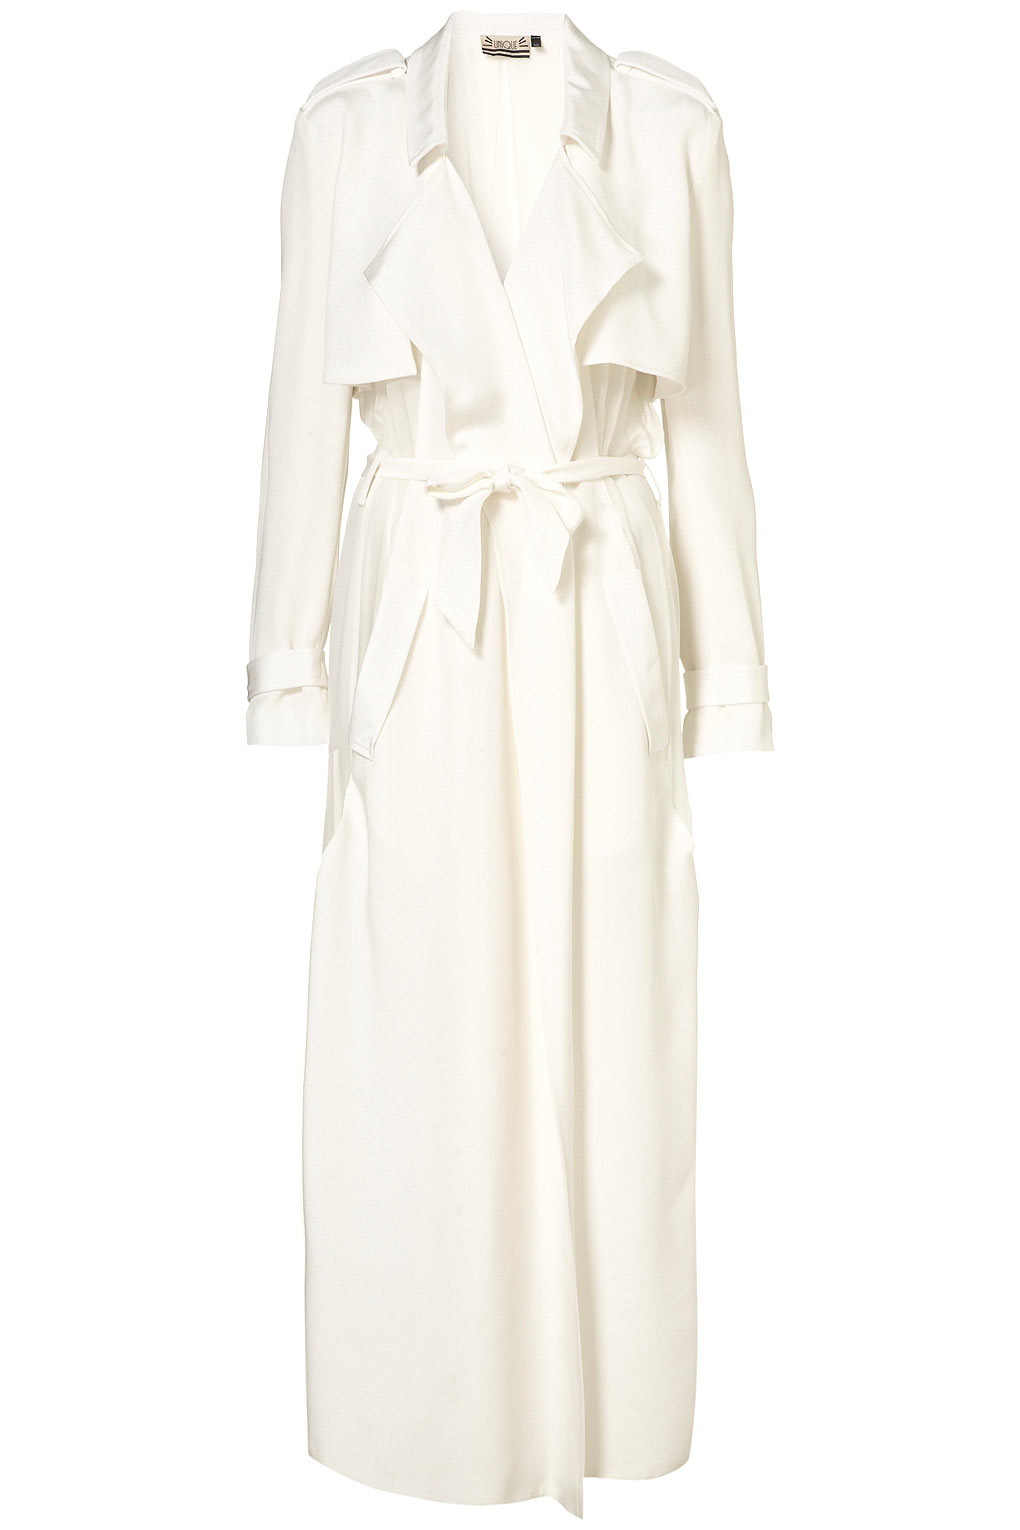 Lyst - Topshop Pharoah Maxi Coat By Unique in White